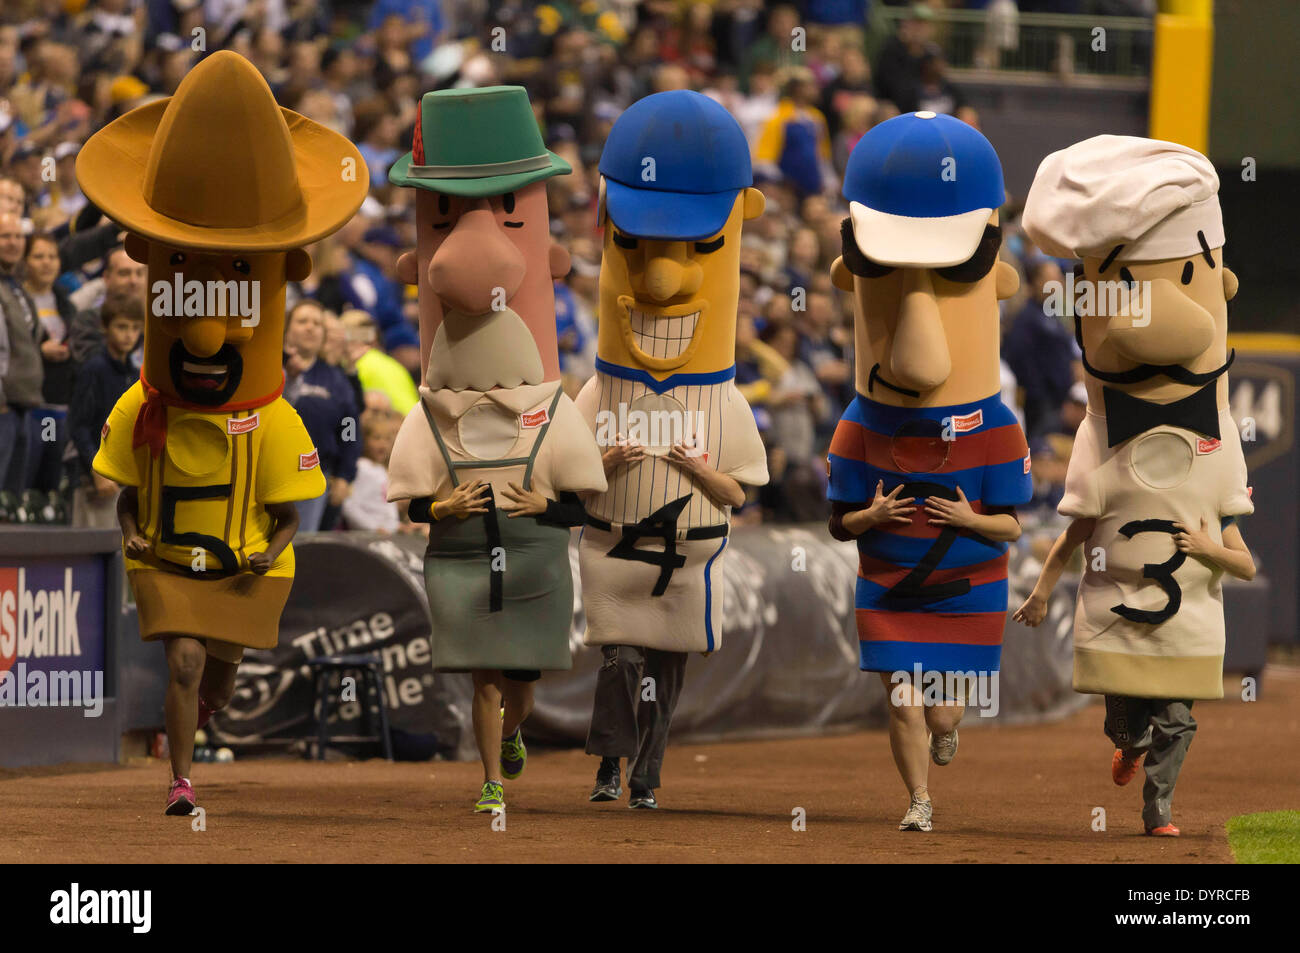 Milwaukee, Wisconsin, USA. 23rd Apr, 2014. April 23, 2014: The sausage race during the Major League Baseball game between the Milwaukee Brewers and the San Diego Padres at Miller Park in Milwaukee, WI. Brewers defeated Padres 5-2. John Fisher/CSM/Alamy Live News Stock Photo